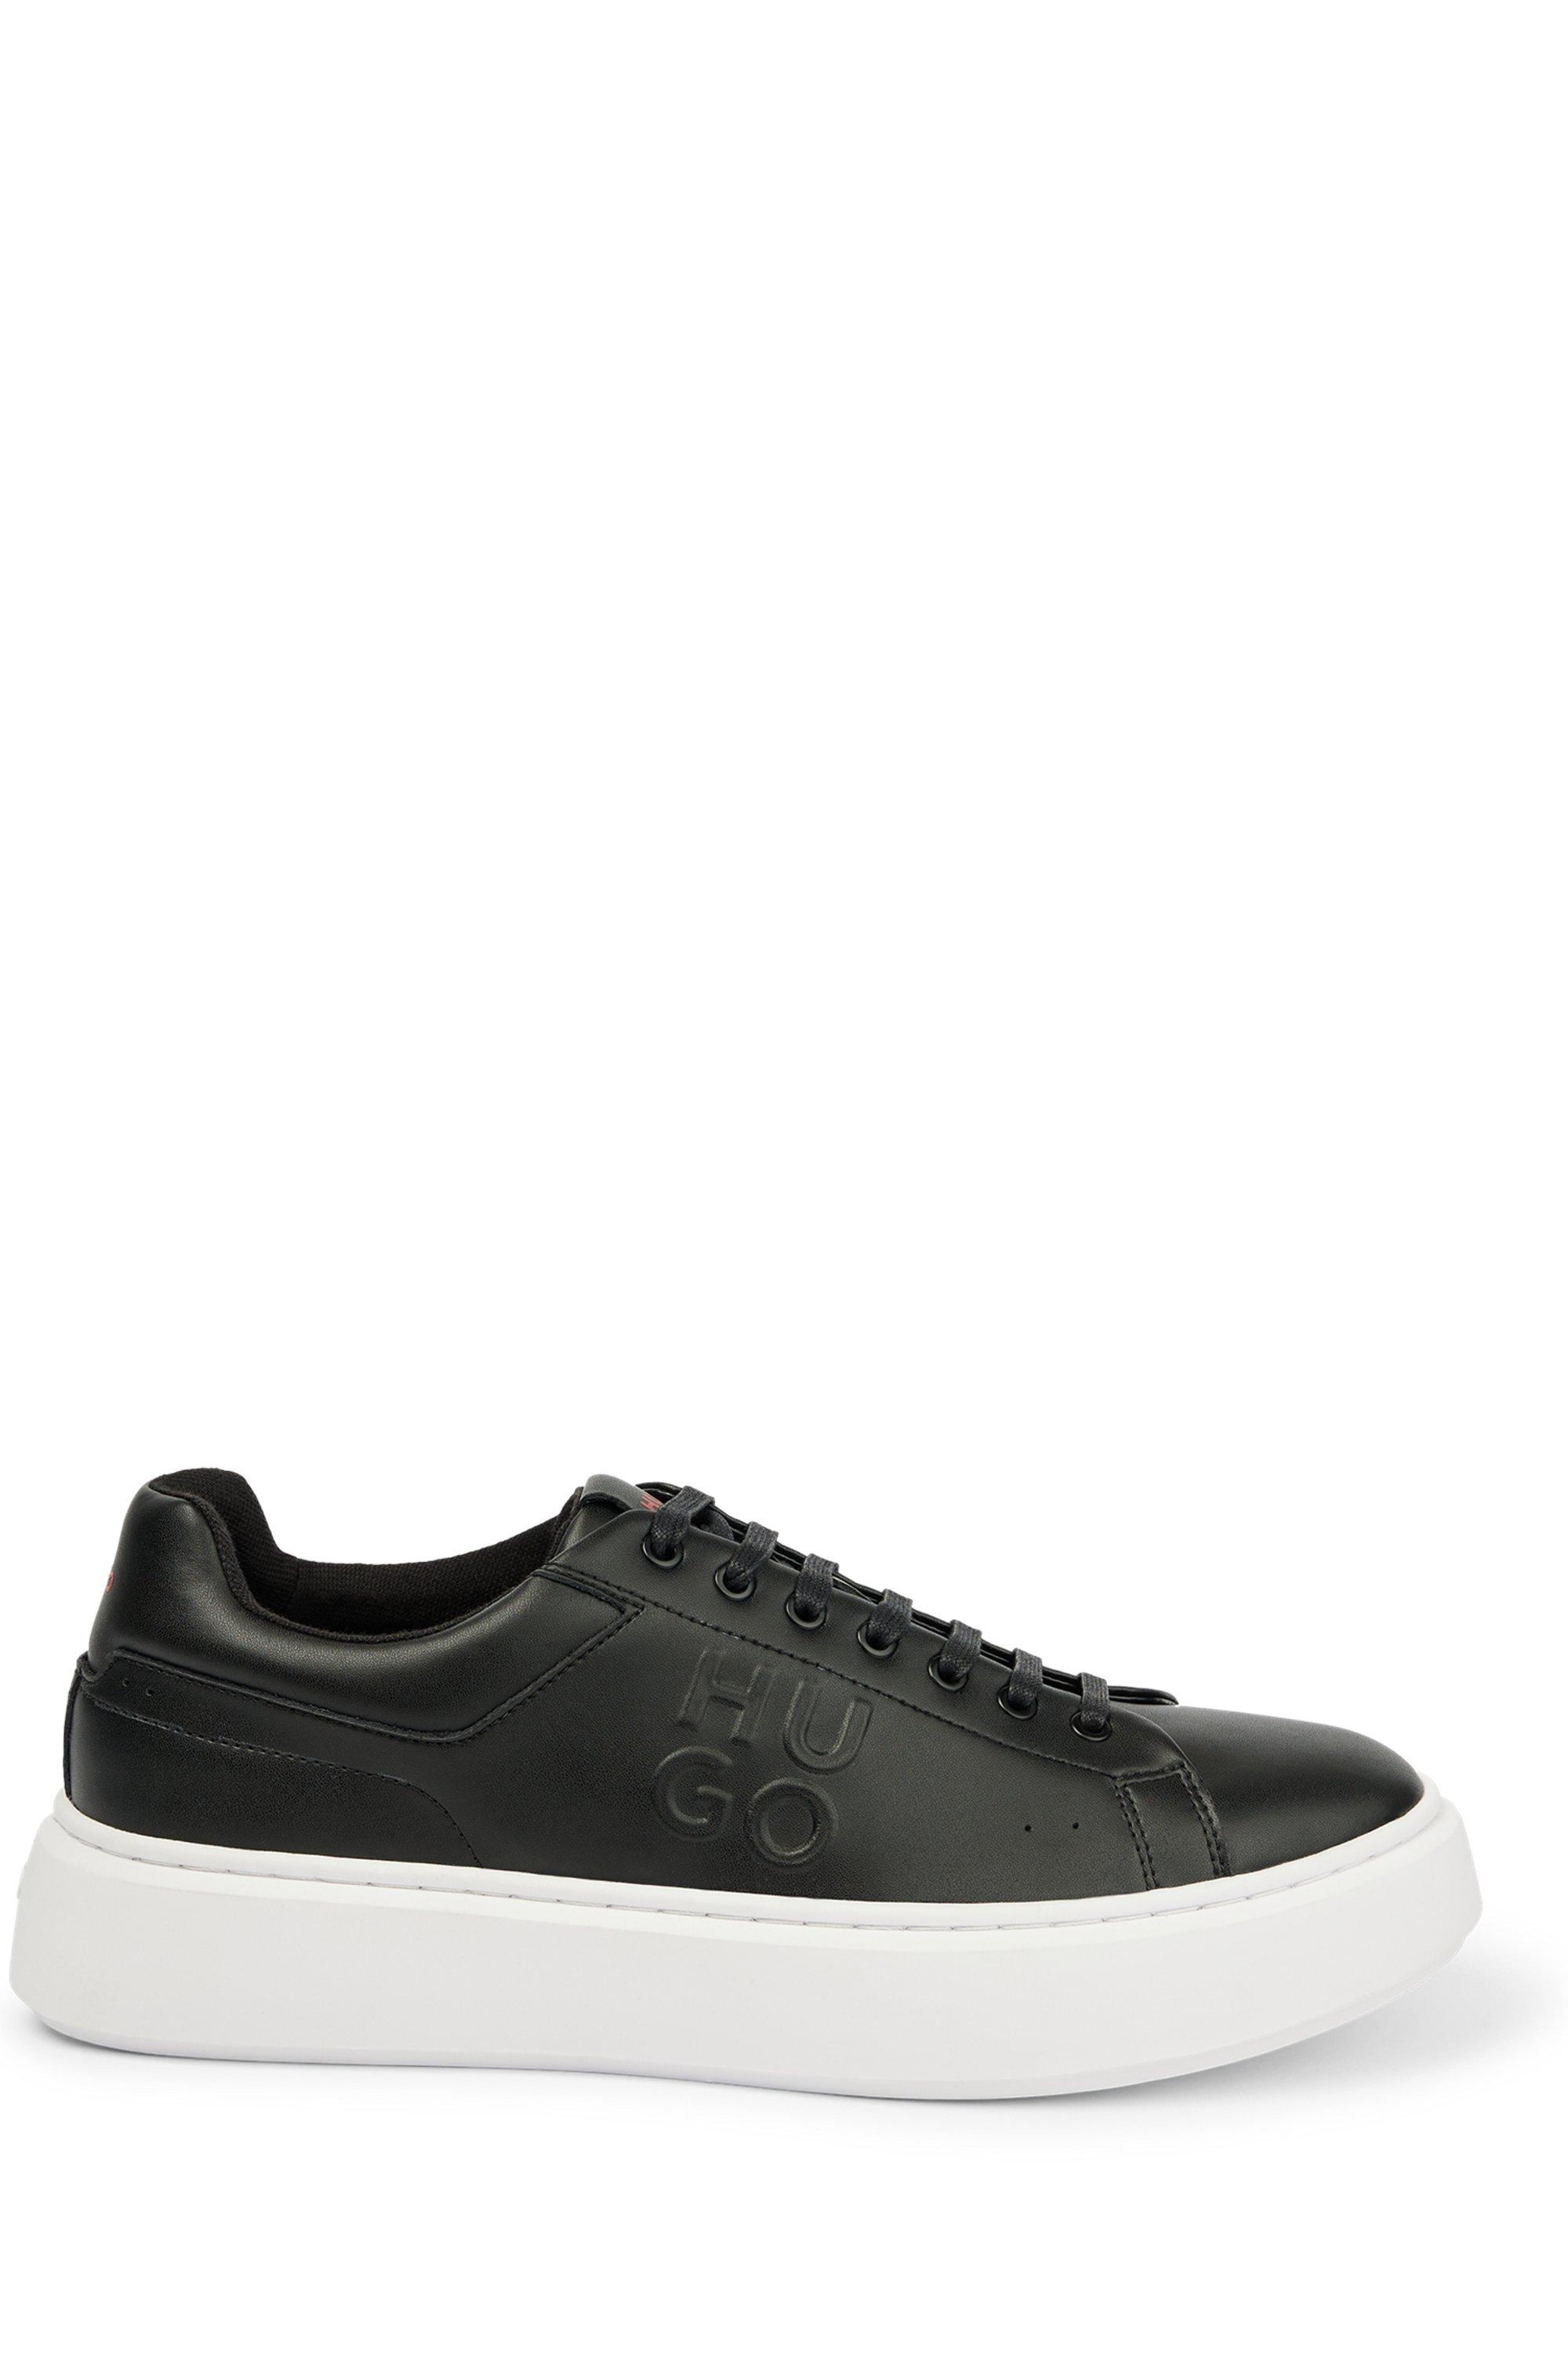 BOSS by HUGO BOSS Low-top Trainers With Debossed Stacked Logo in Black ...